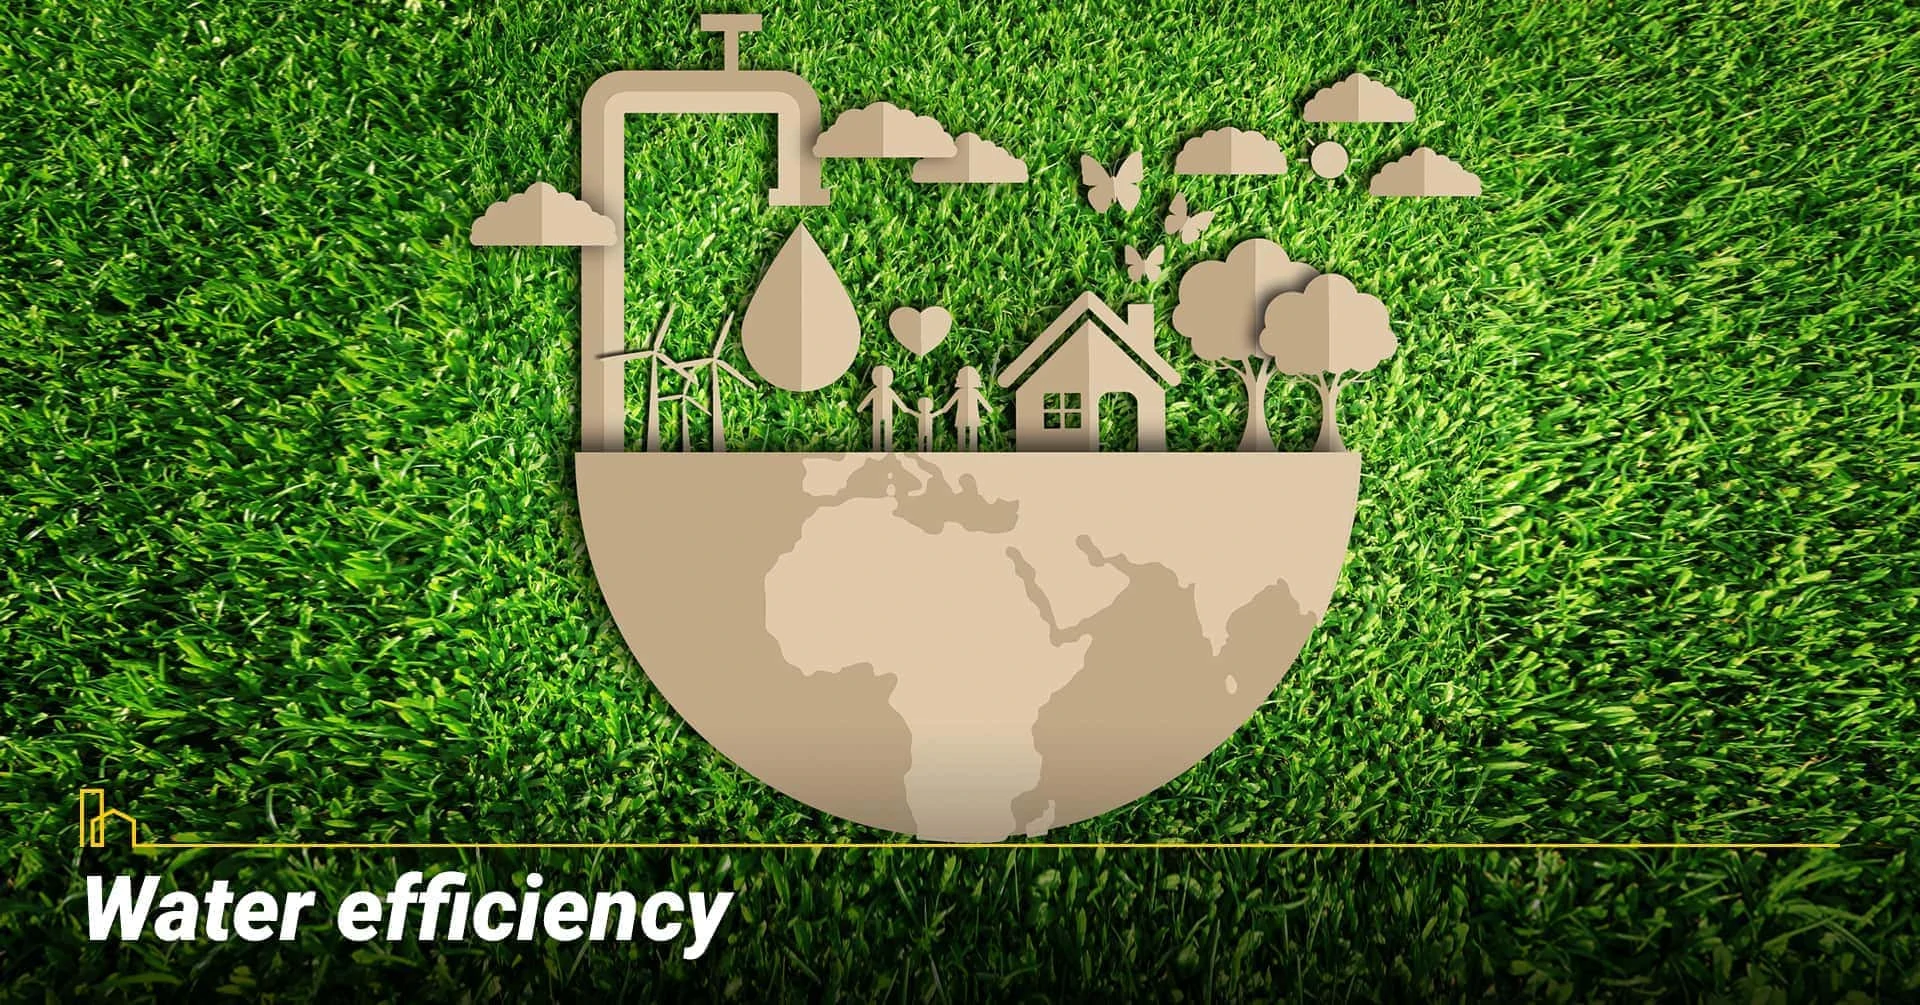 Water efficiency, water consumption of the property